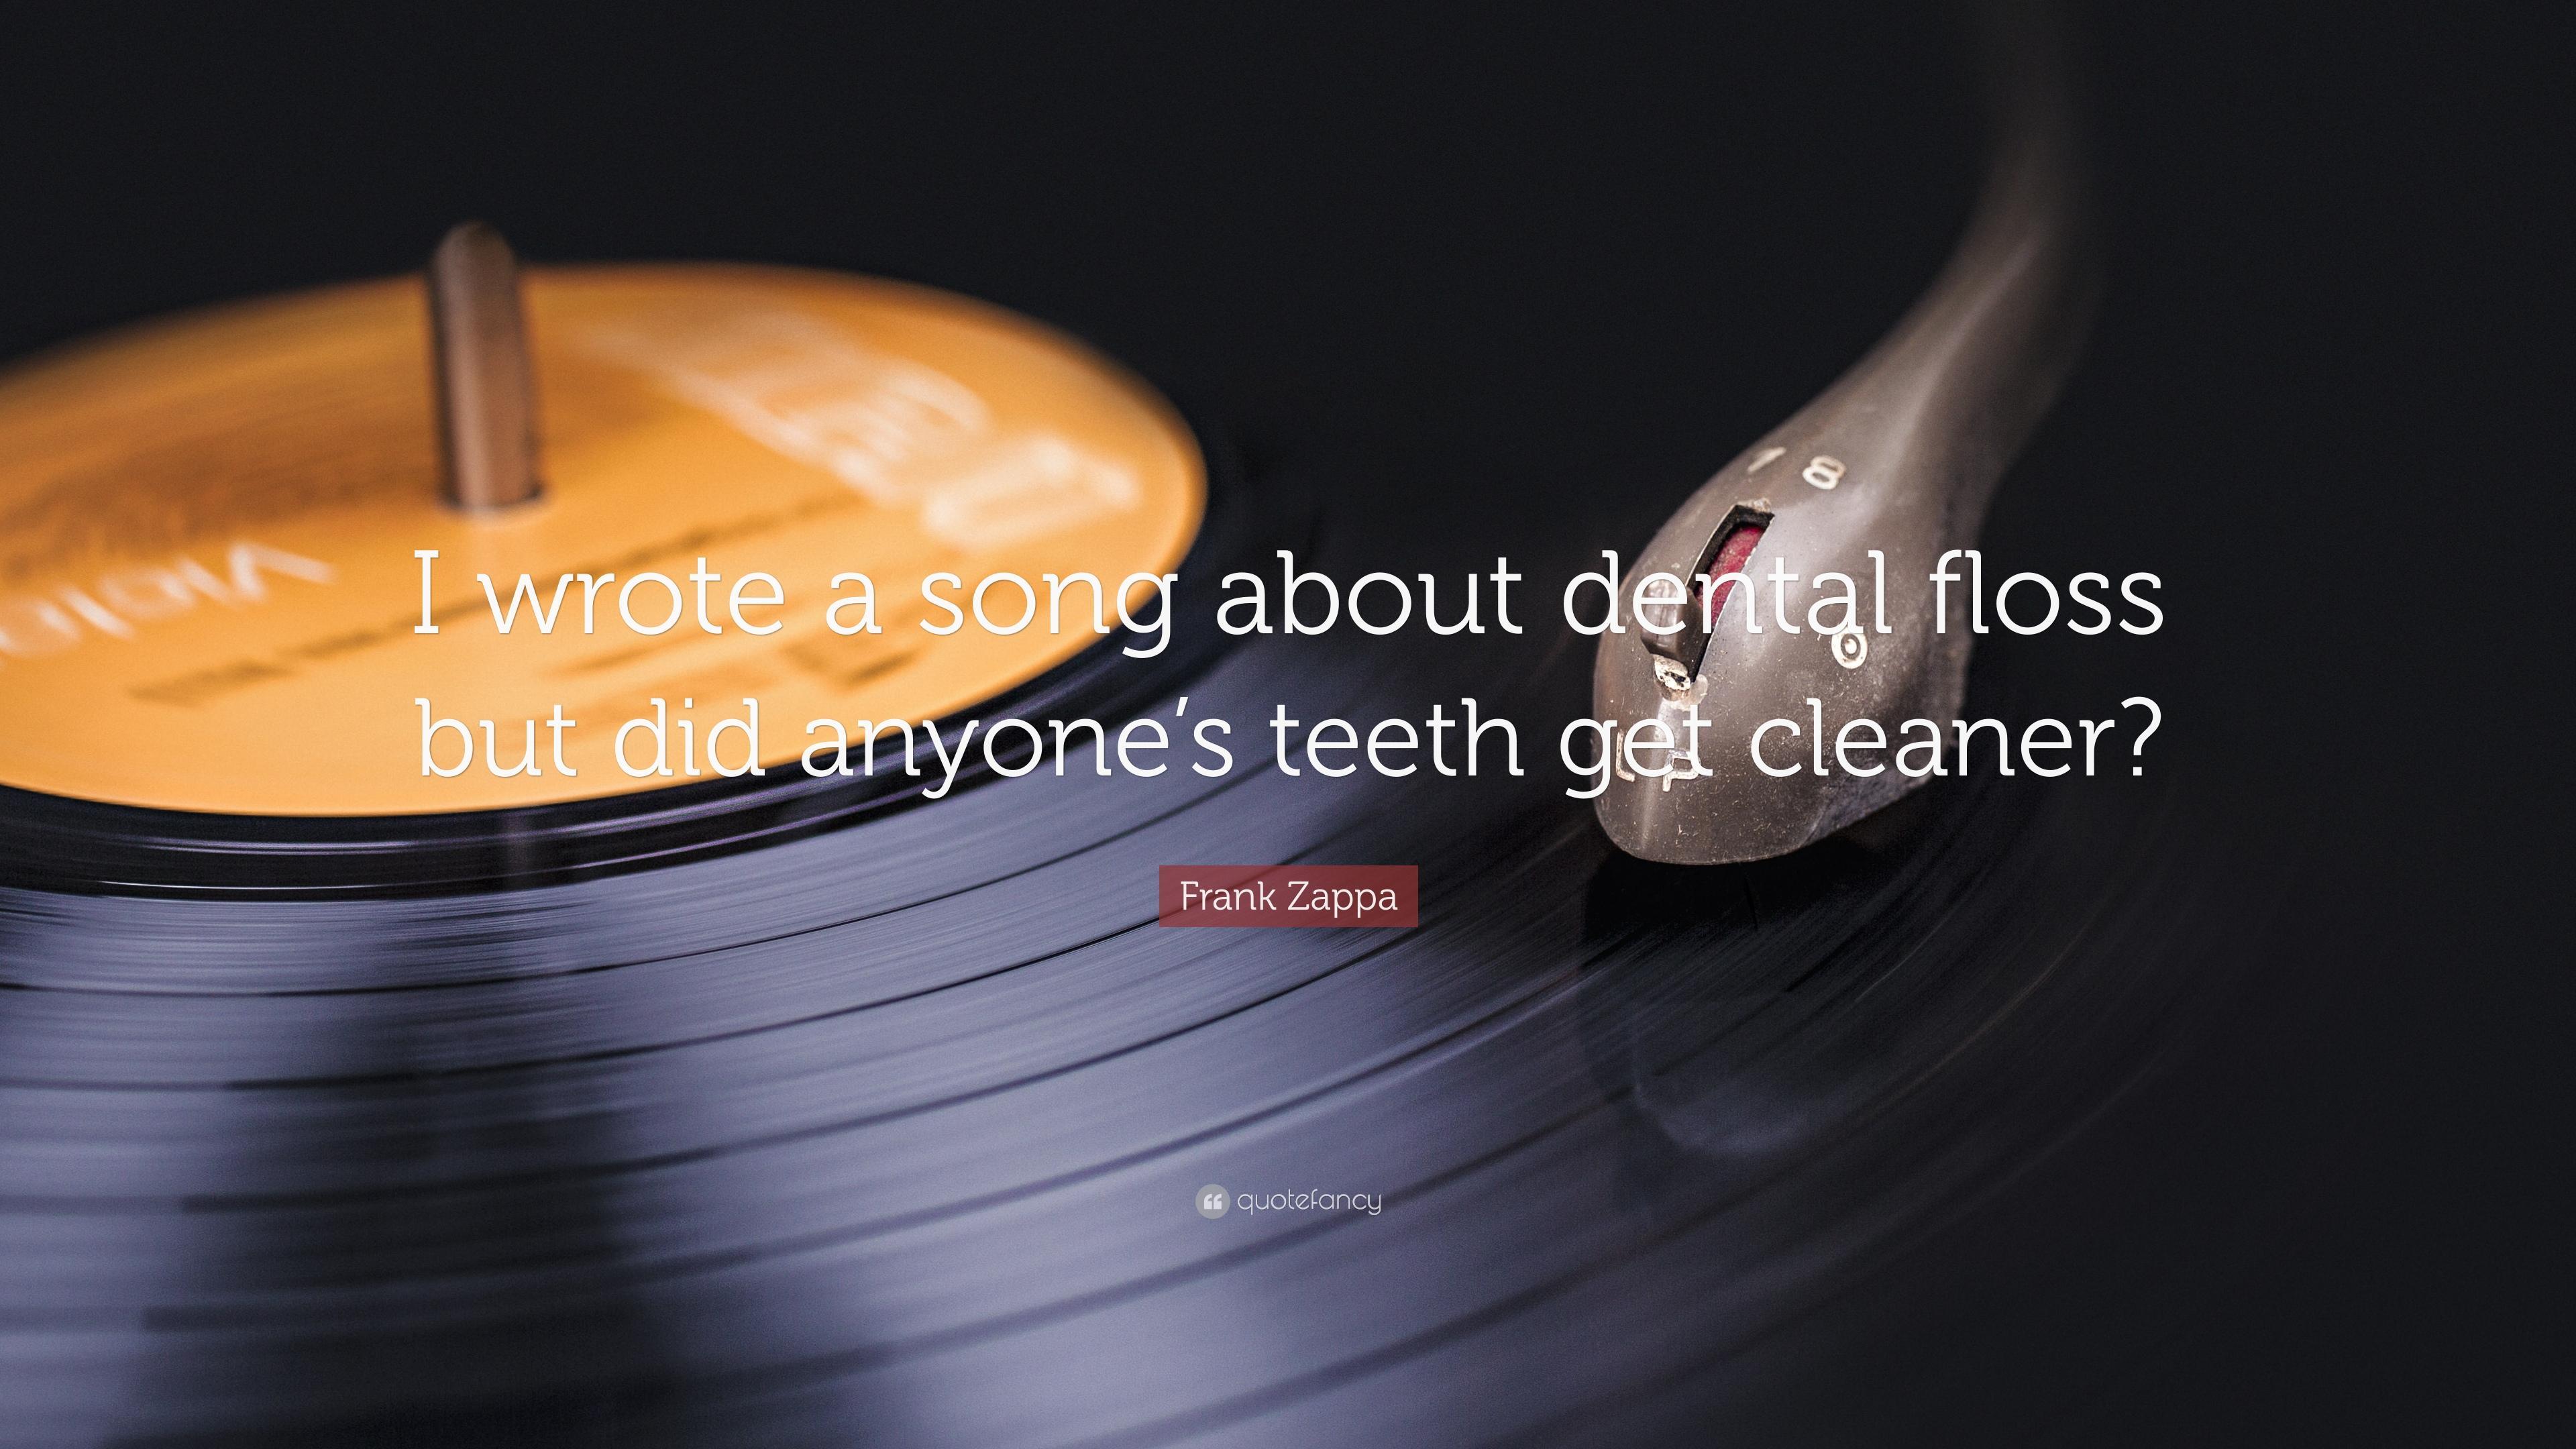 Frank Zappa Quote: “I wrote a song about dental floss but did